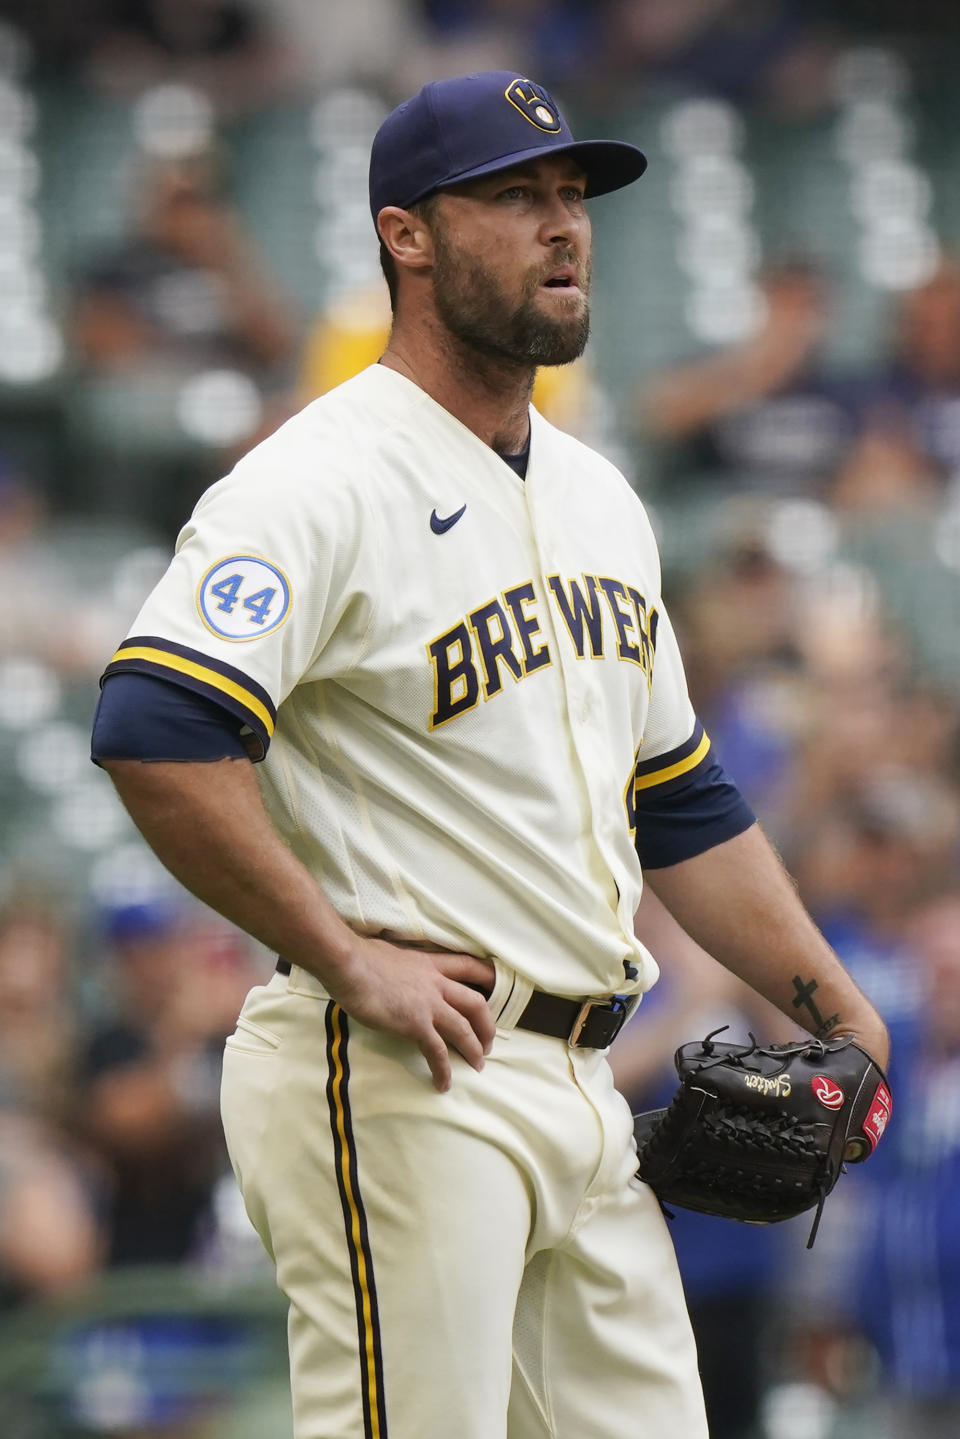 Milwaukee Brewers relief pitcher Hunter Strickland pauses after Kansas City Royals' Ryan O'Hearn hit a two-run home run during the seventh inning of a baseball game Tuesday, July 20, 2021, in Milwaukee. (AP Photo/Nam Y. Huh)